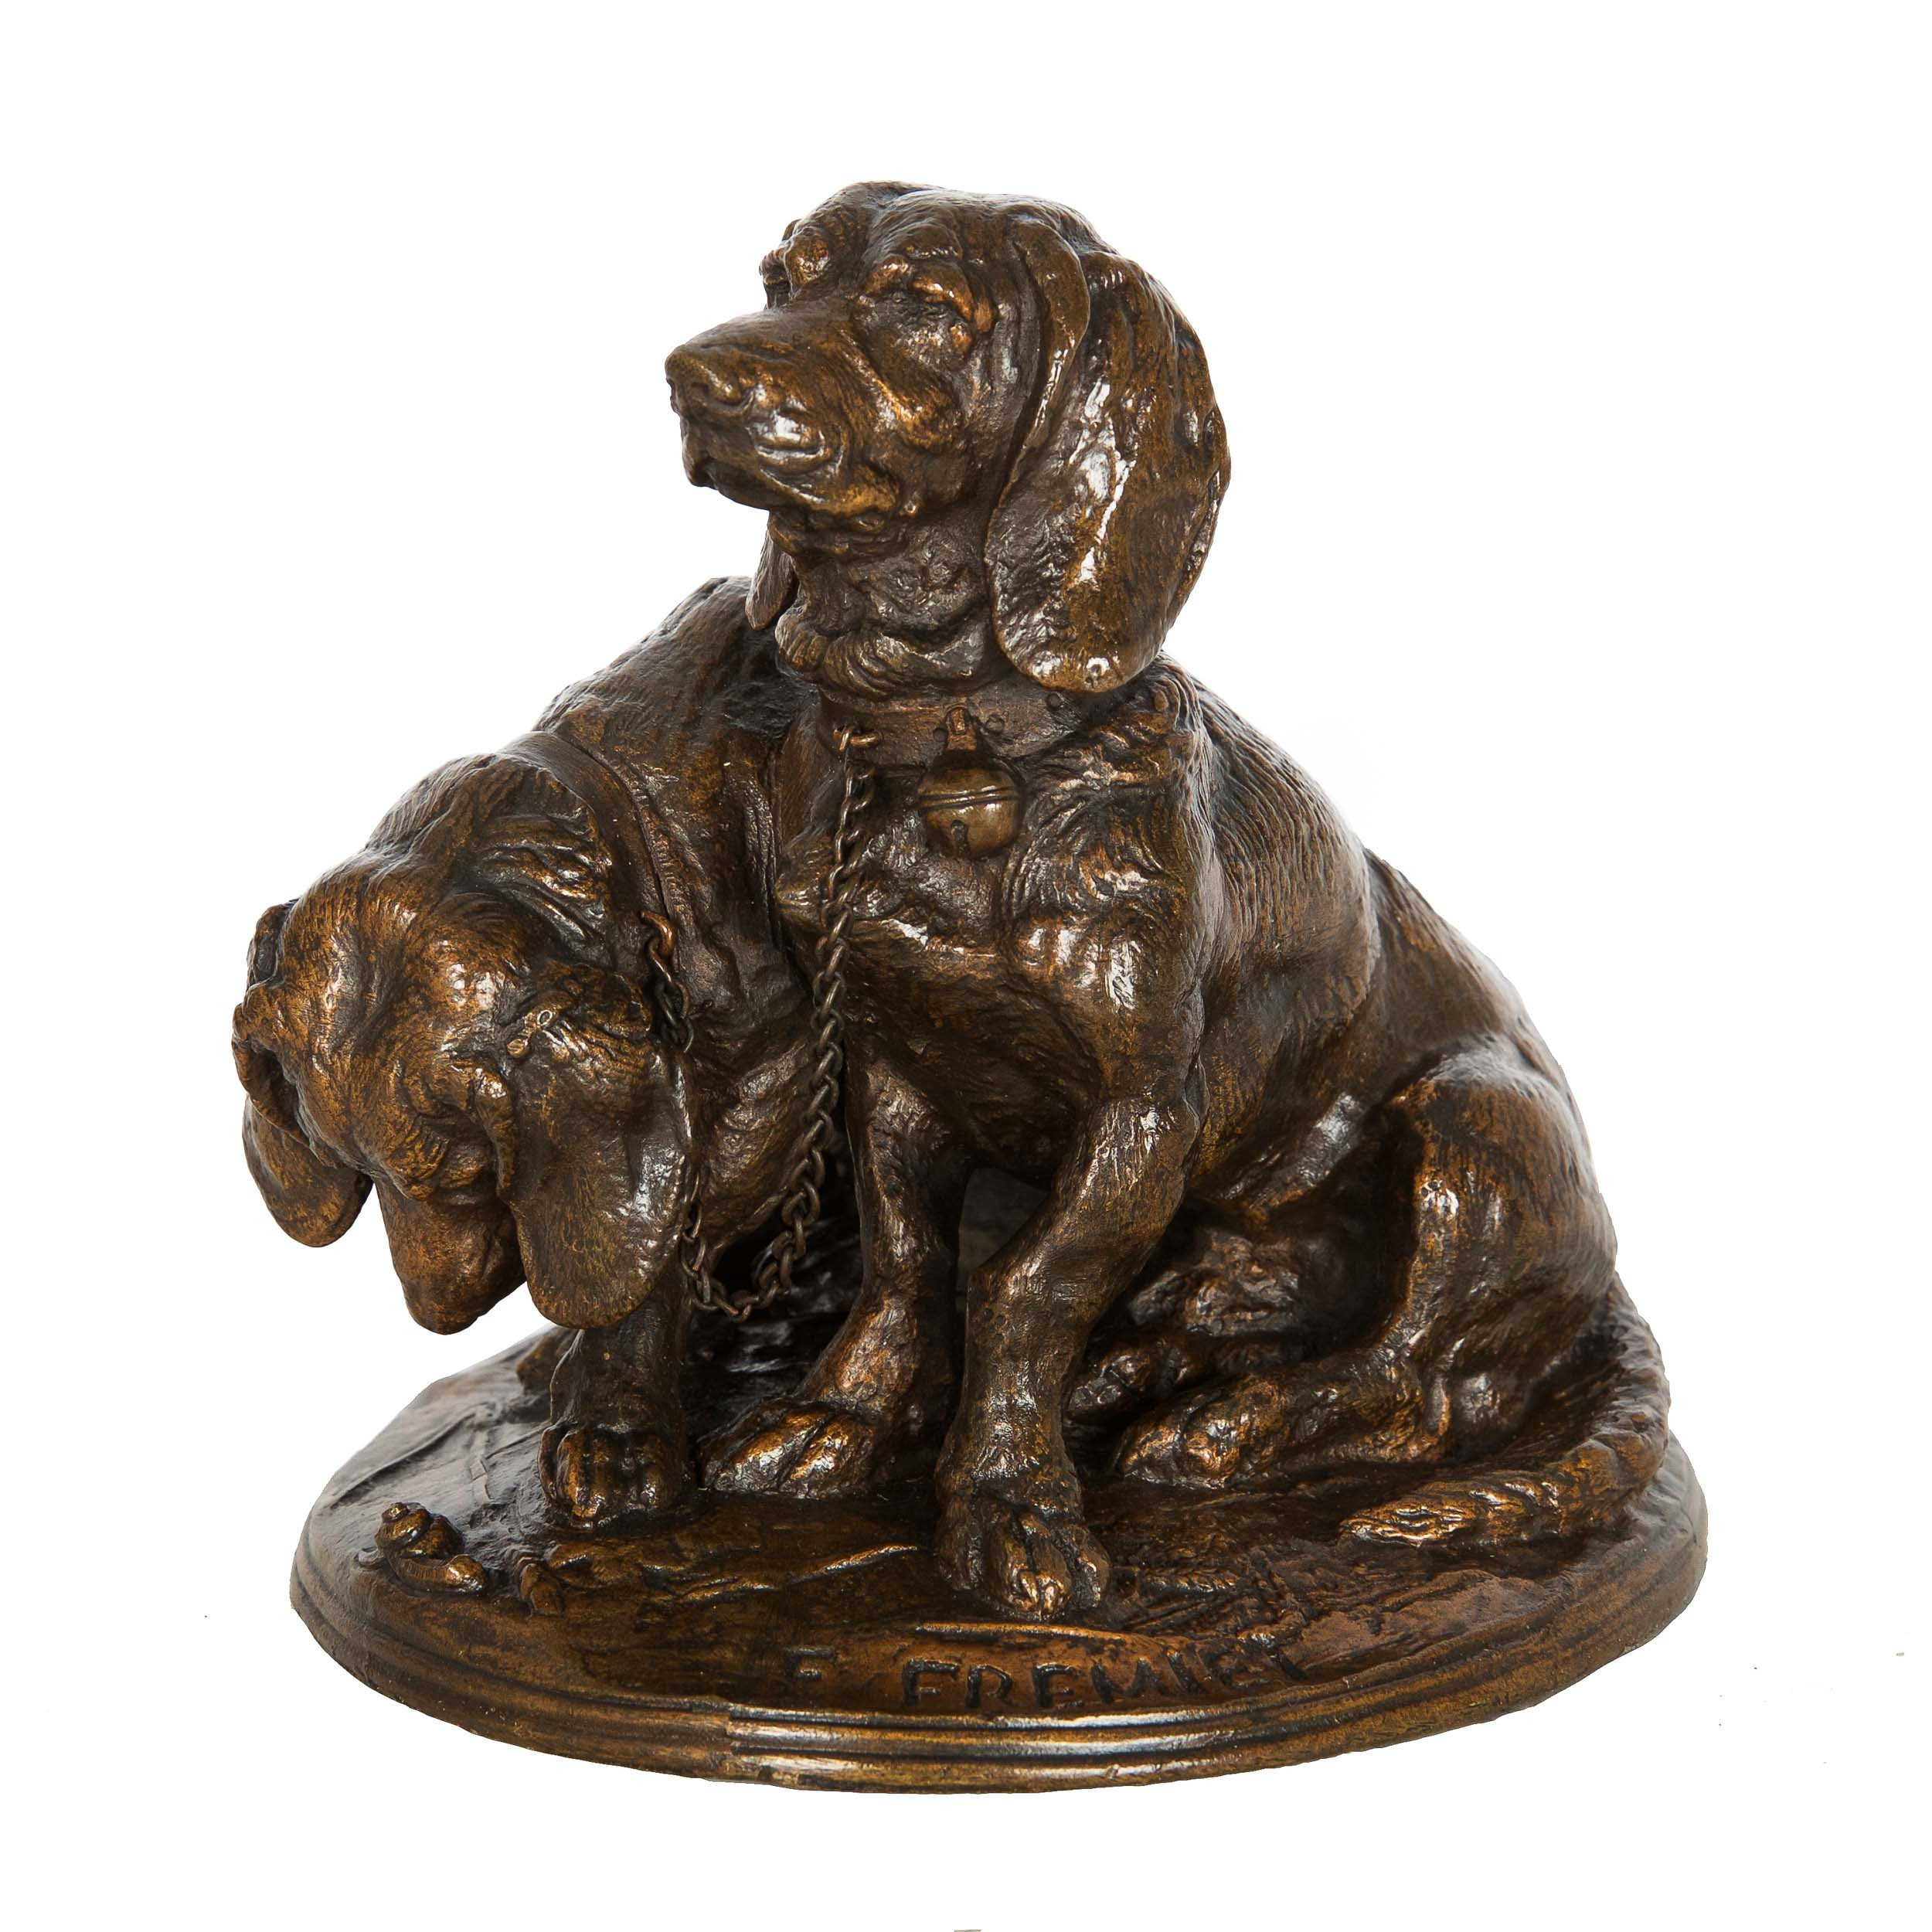 Basset Hound Statues for Sale